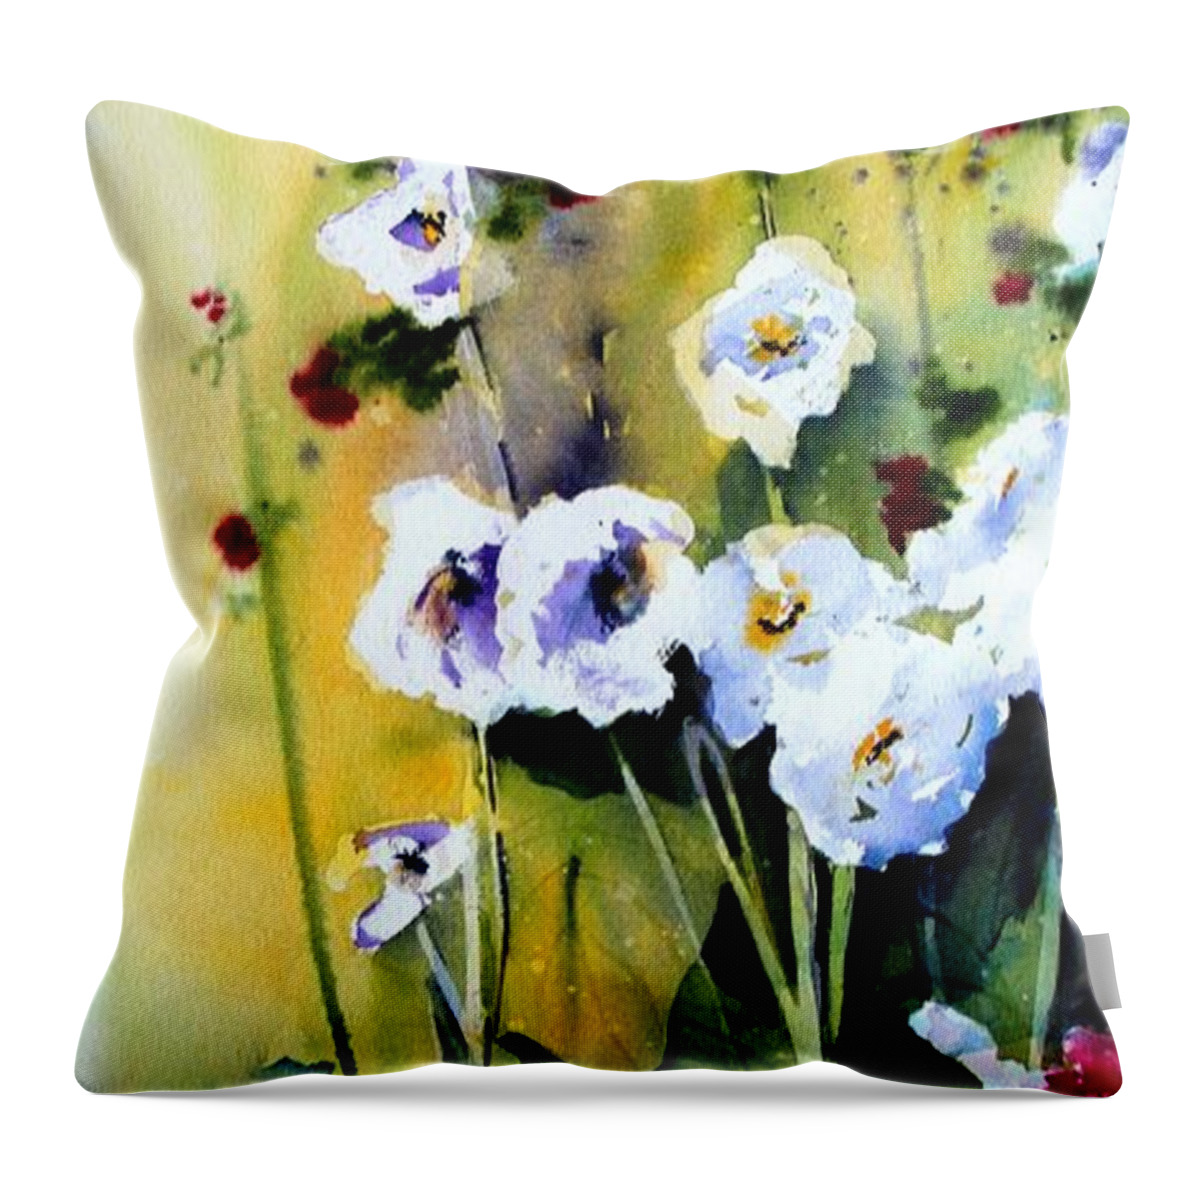 Hollyhock Throw Pillow featuring the painting Hollyhocks by Marti Green